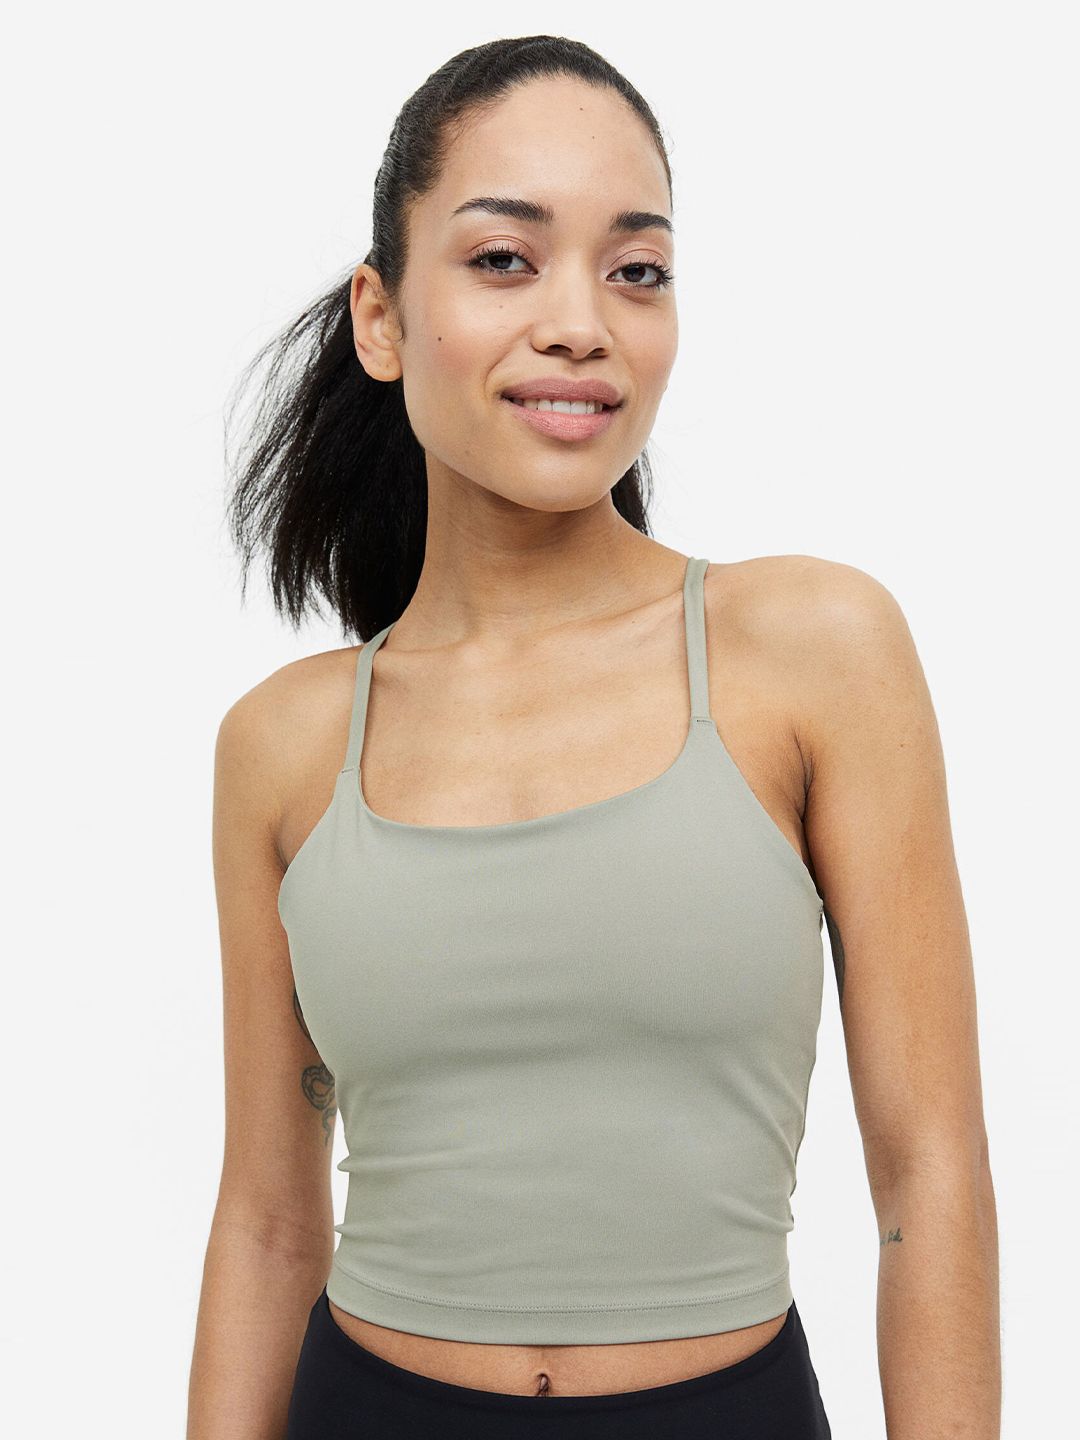 H&M Women DryMove Cropped Sports Vest Top Price in India